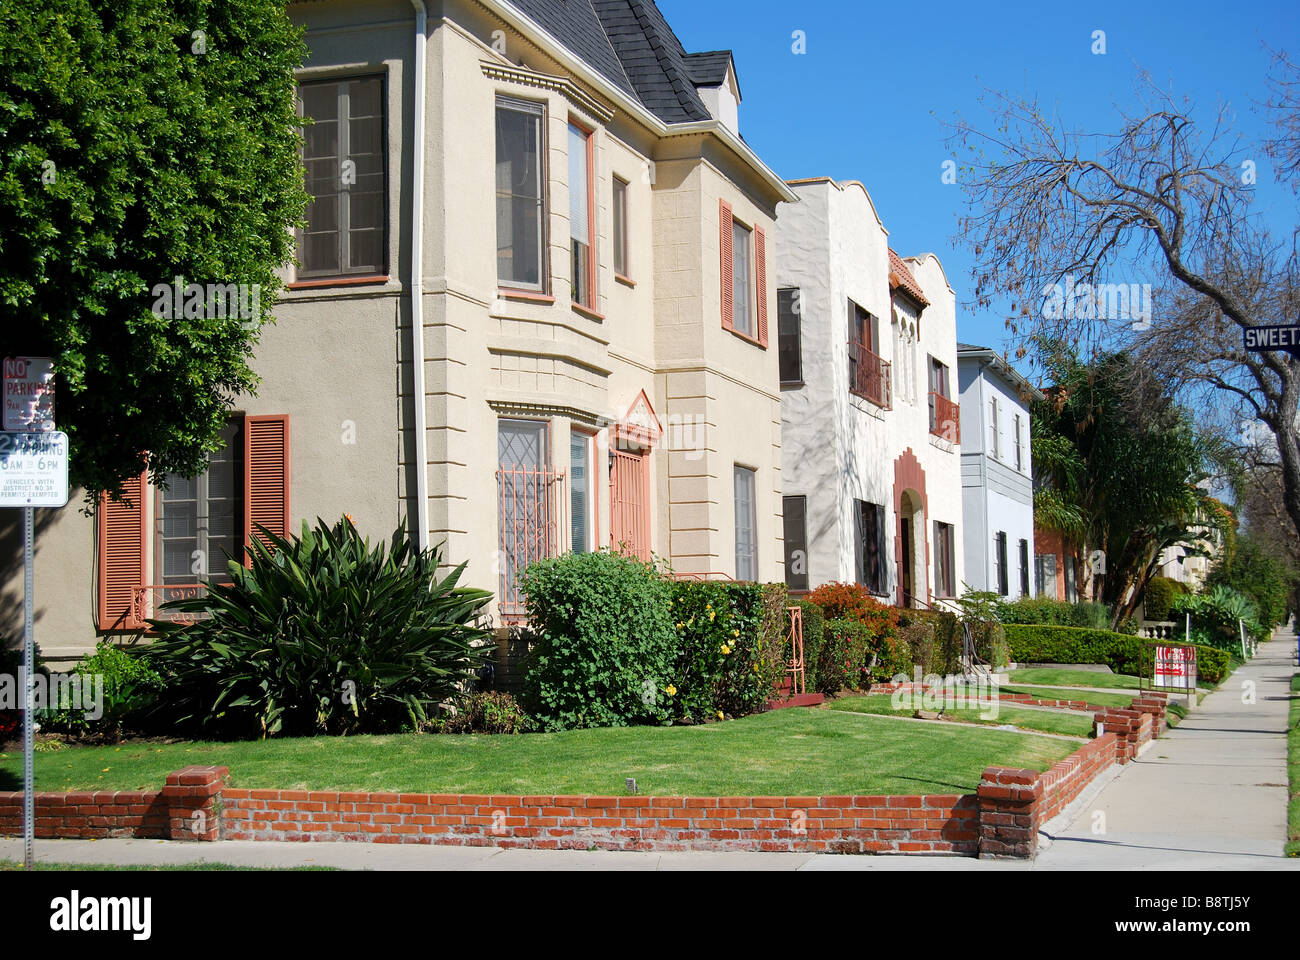 Residential Street, Beverly Hills, Los Angeles, California, United States of America Stock Photo